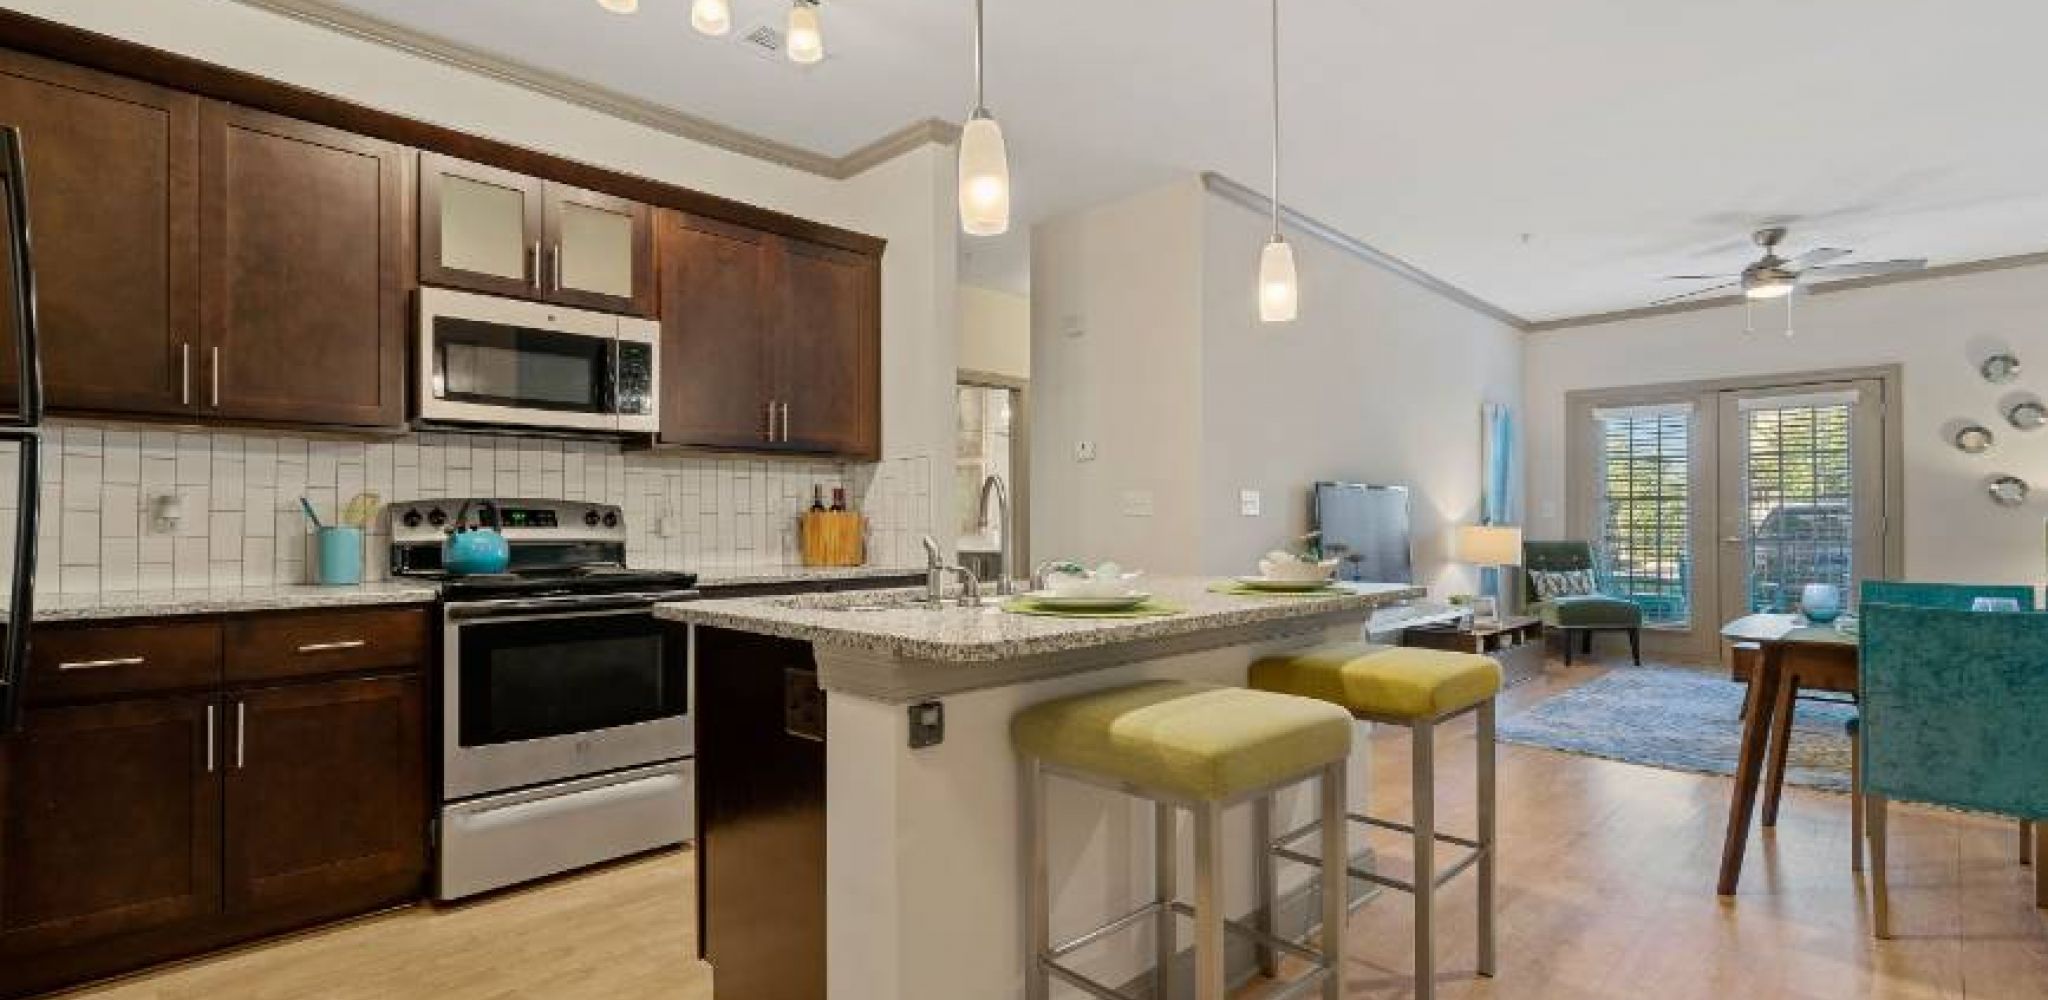 Hawthorne at Southside apartment kitchen with espresso cabinetry, stainless steel appliances, and kitchen island with 2 chairs